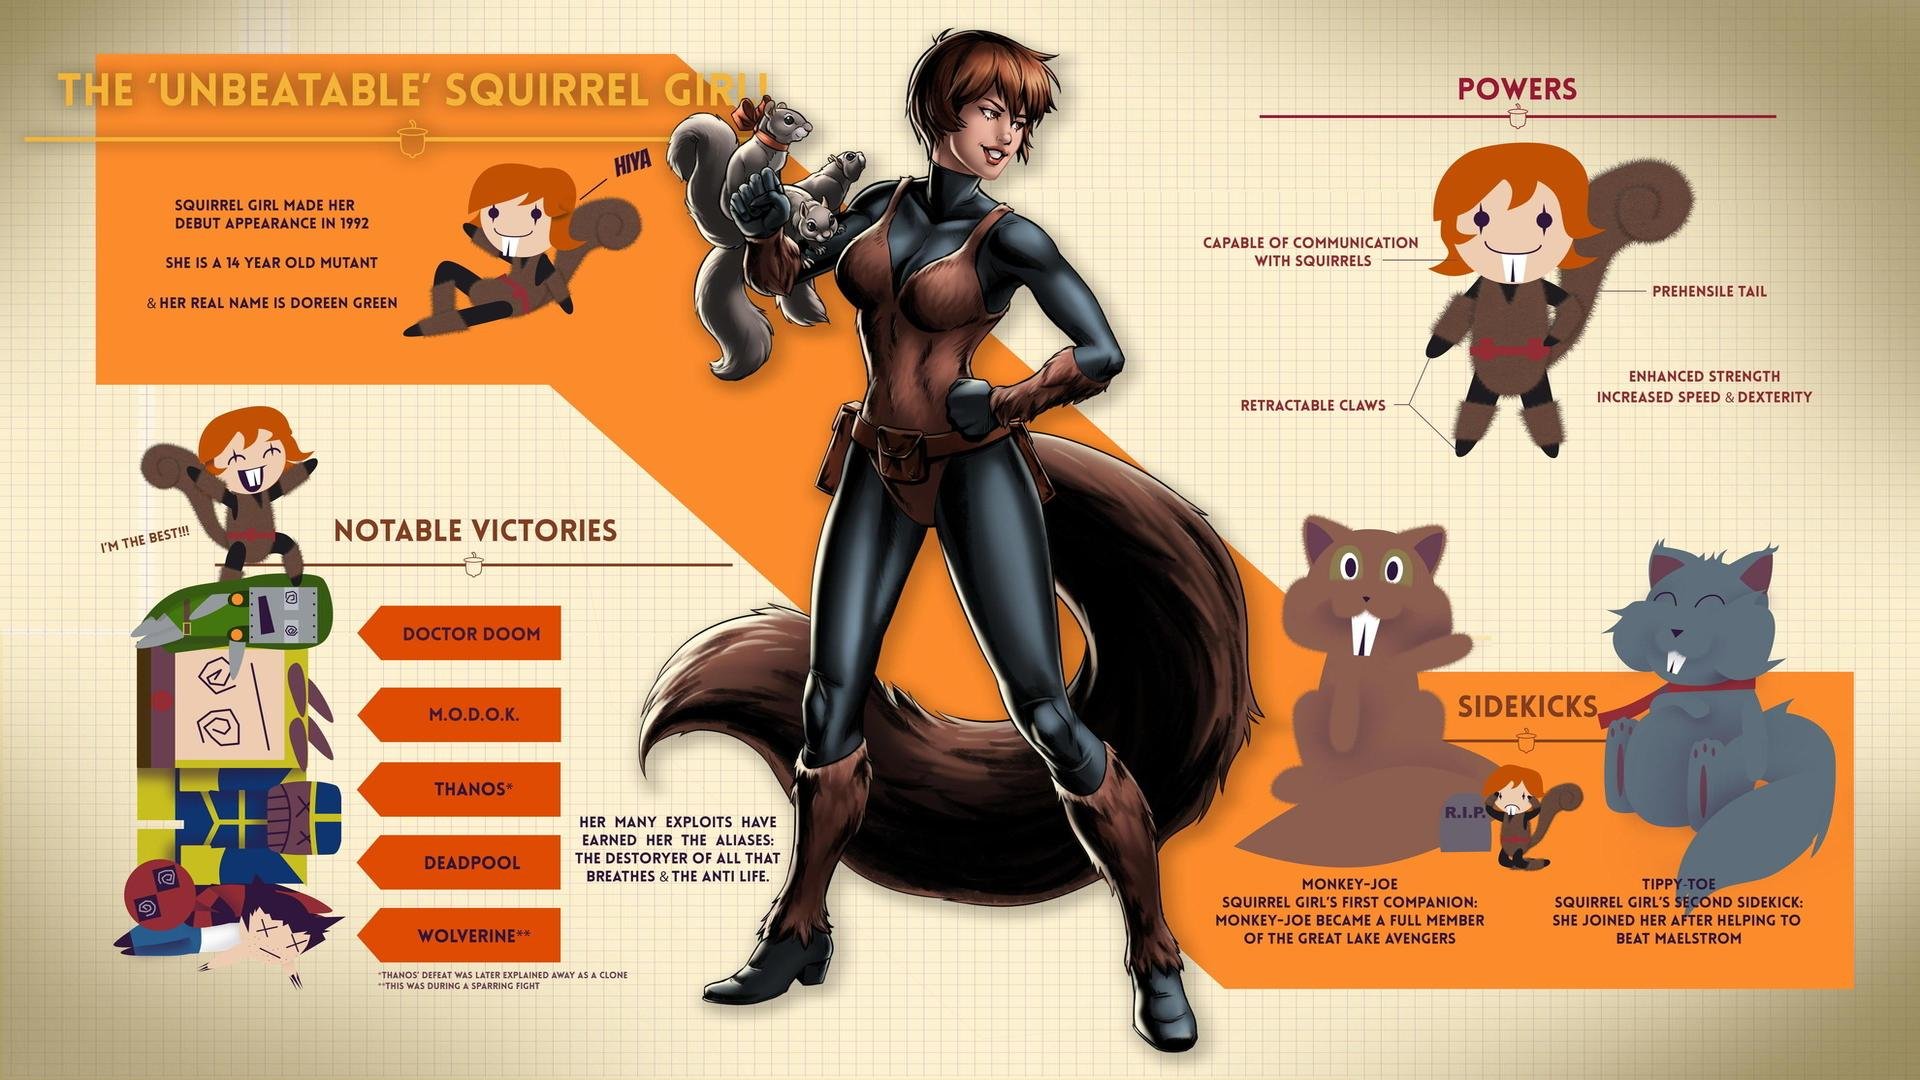 Actress Anna Kendrick Wants to Play Marvel's Squirrel Girl!